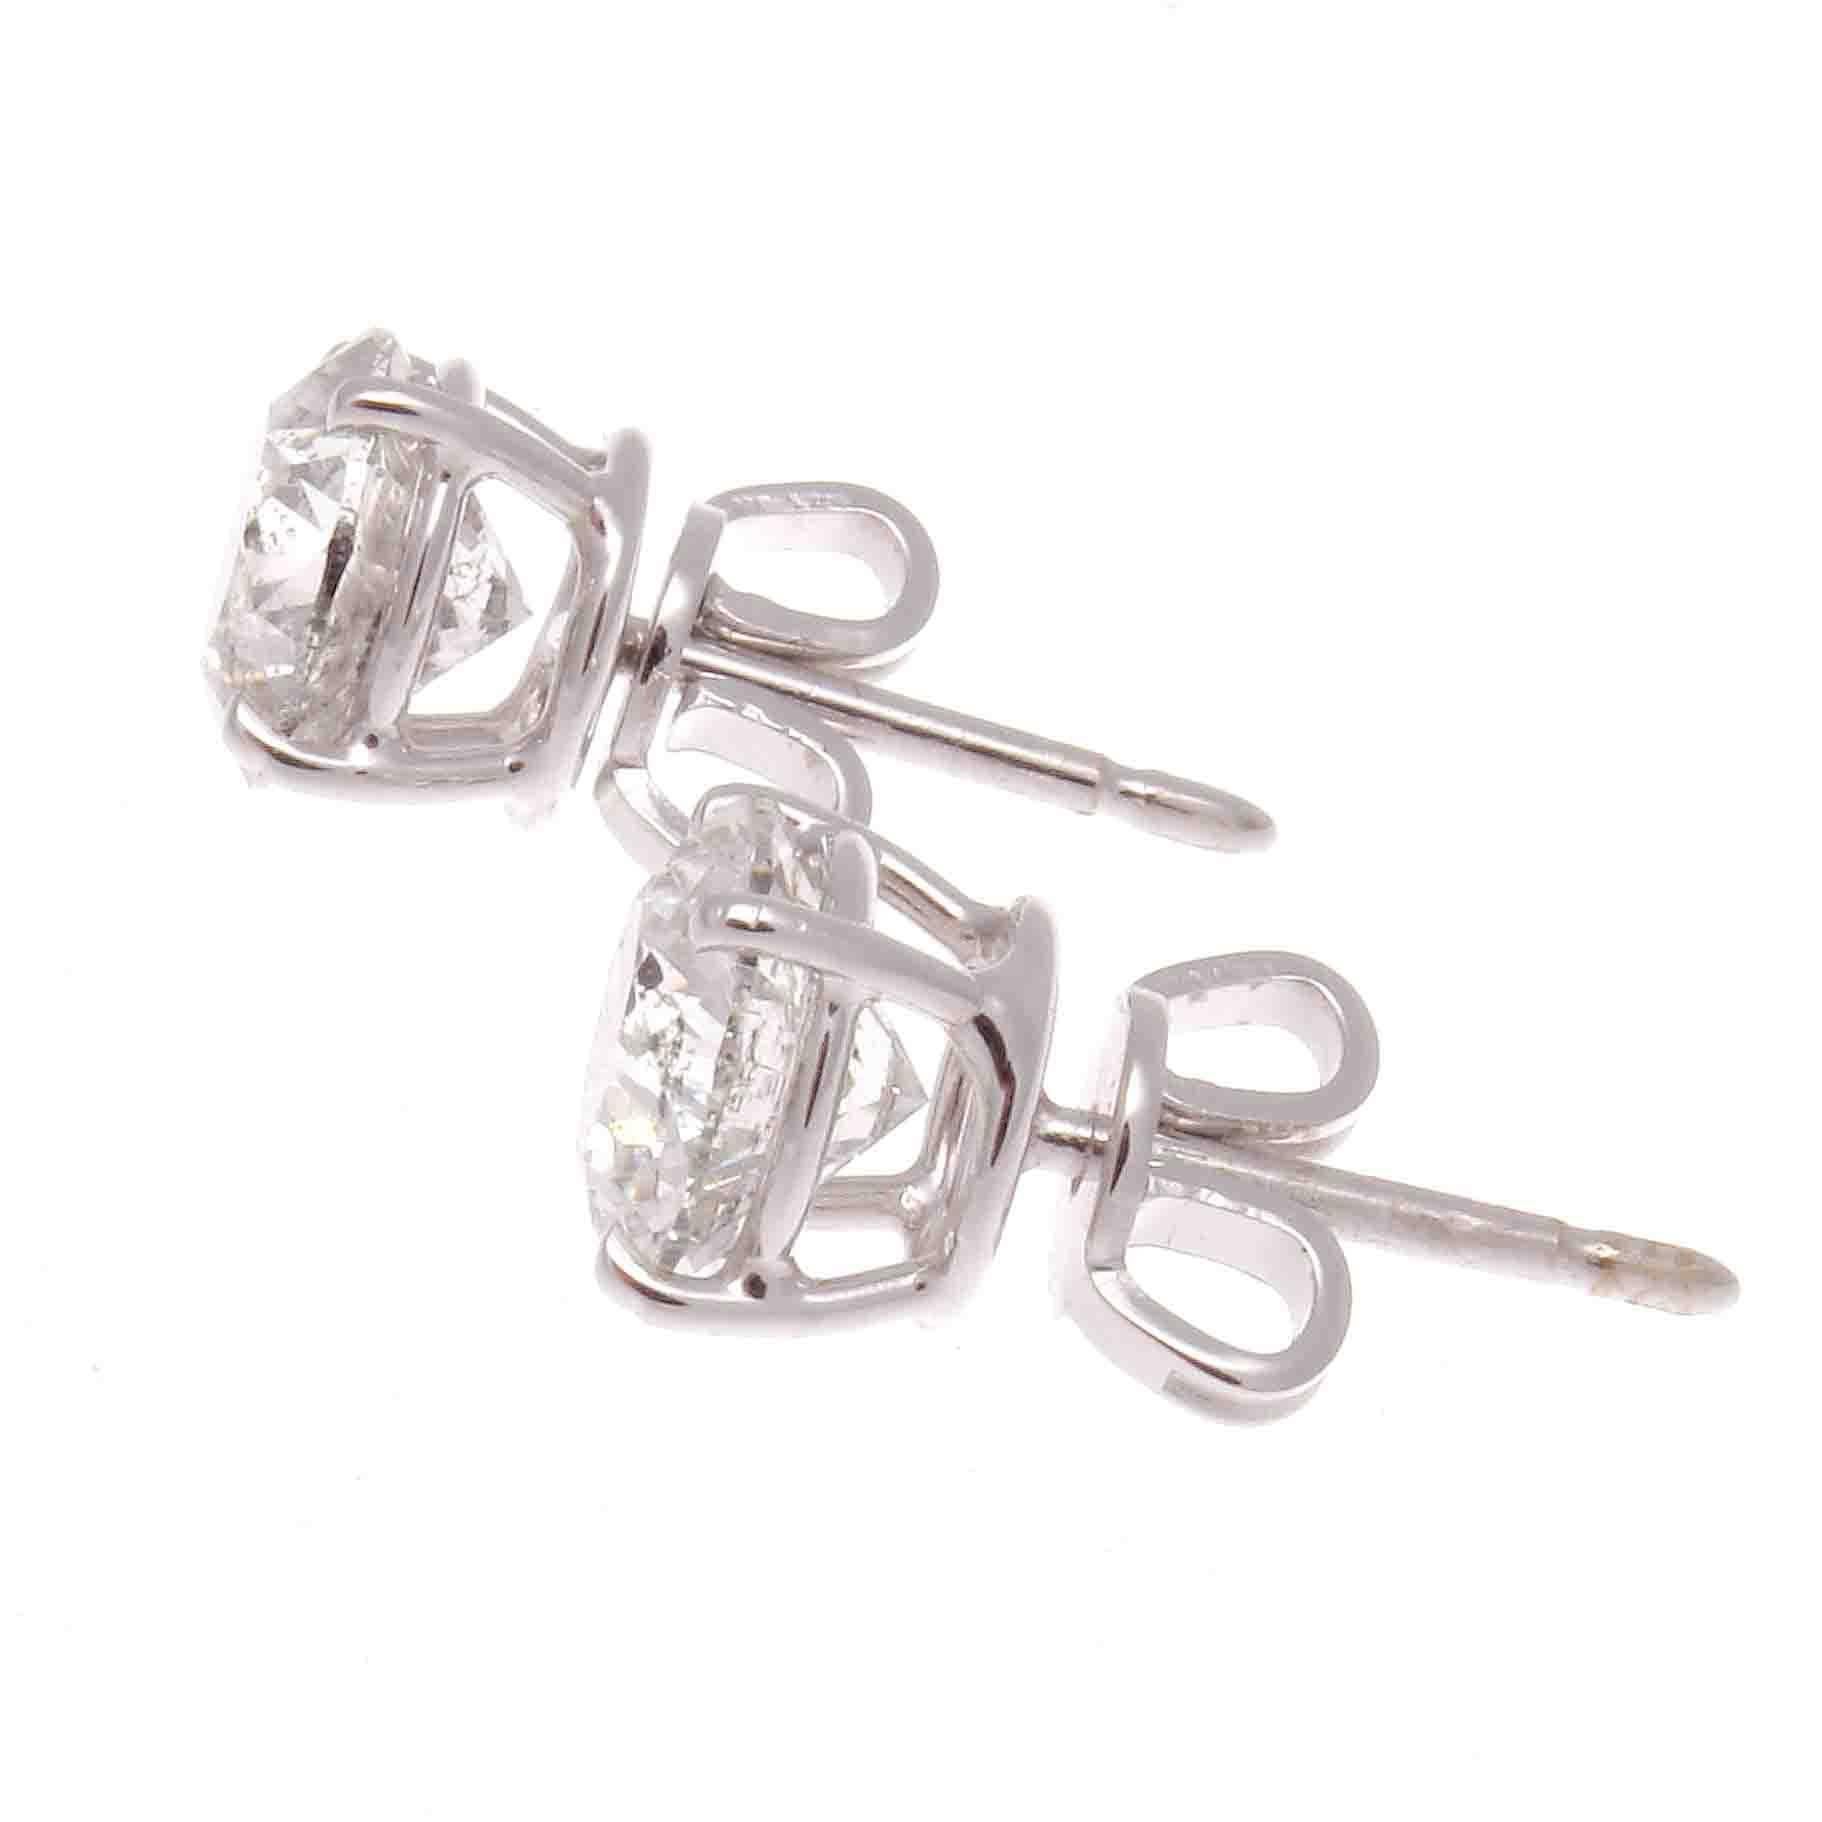 Elegance and sparkle radiates from the diamond stud earrings. Featuring a 1.34 carat and 1.38 carat round cut diamonds that are G-H color, I1 clarity. Crafted in platinum.